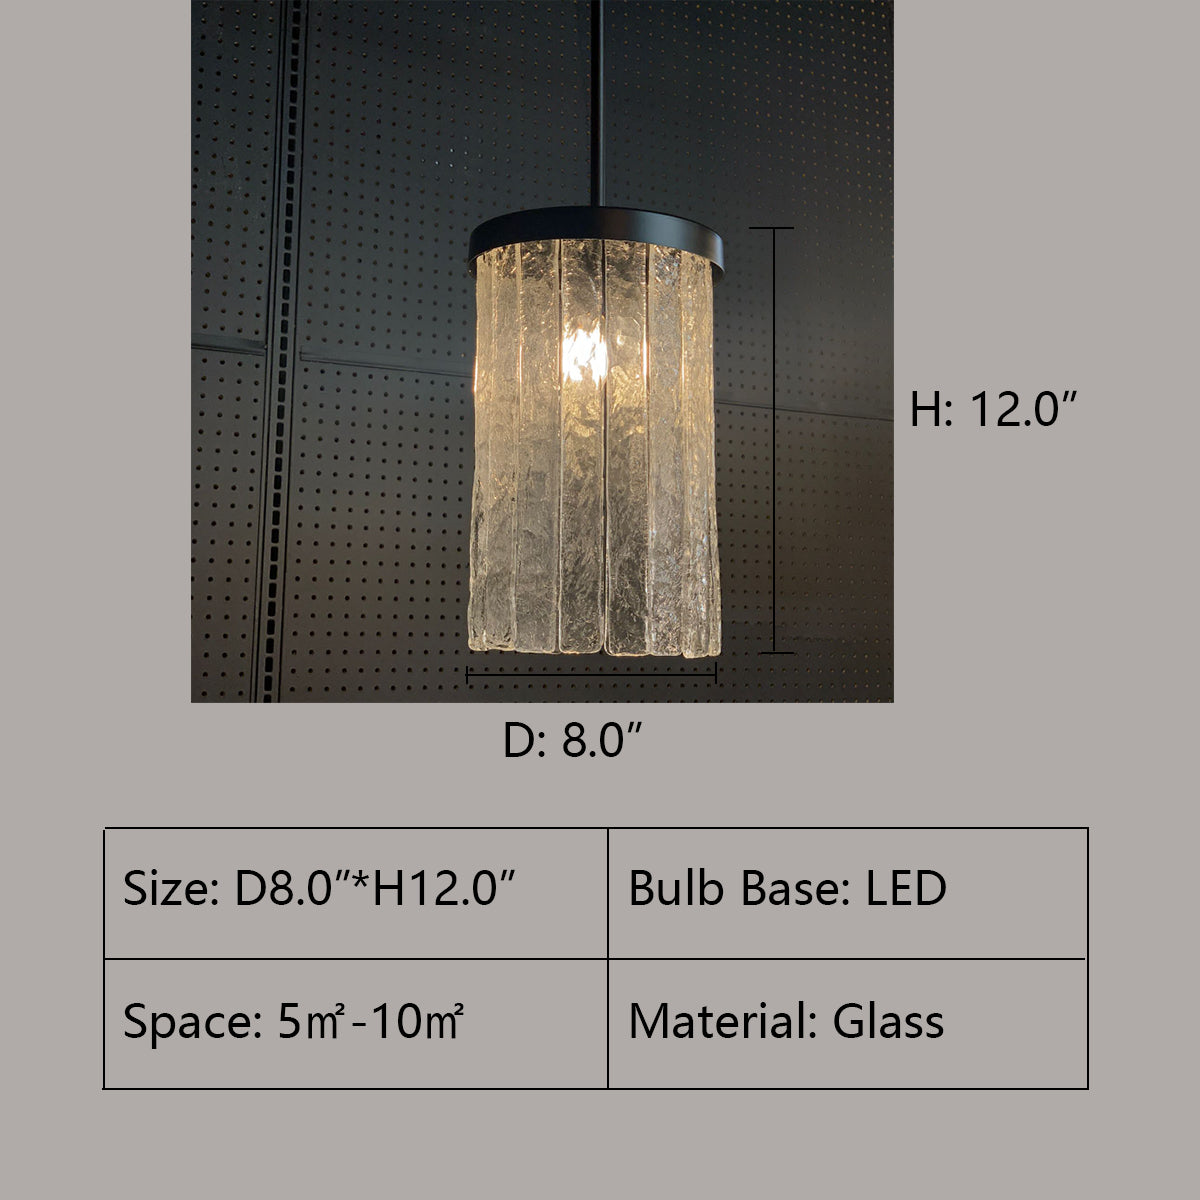 1 Tier: D8.0"*H12.0" SELINE TEXTURED GLASS KITCHEN ISLAND PENDANT LIGHT ,pendant,glass,tiers,layers,multi-tier,cylinder,ceiling,frosted glass,bathroom,kitchen bar,kitchen island,kitchen,dining room,dining table,dining bar ,long table